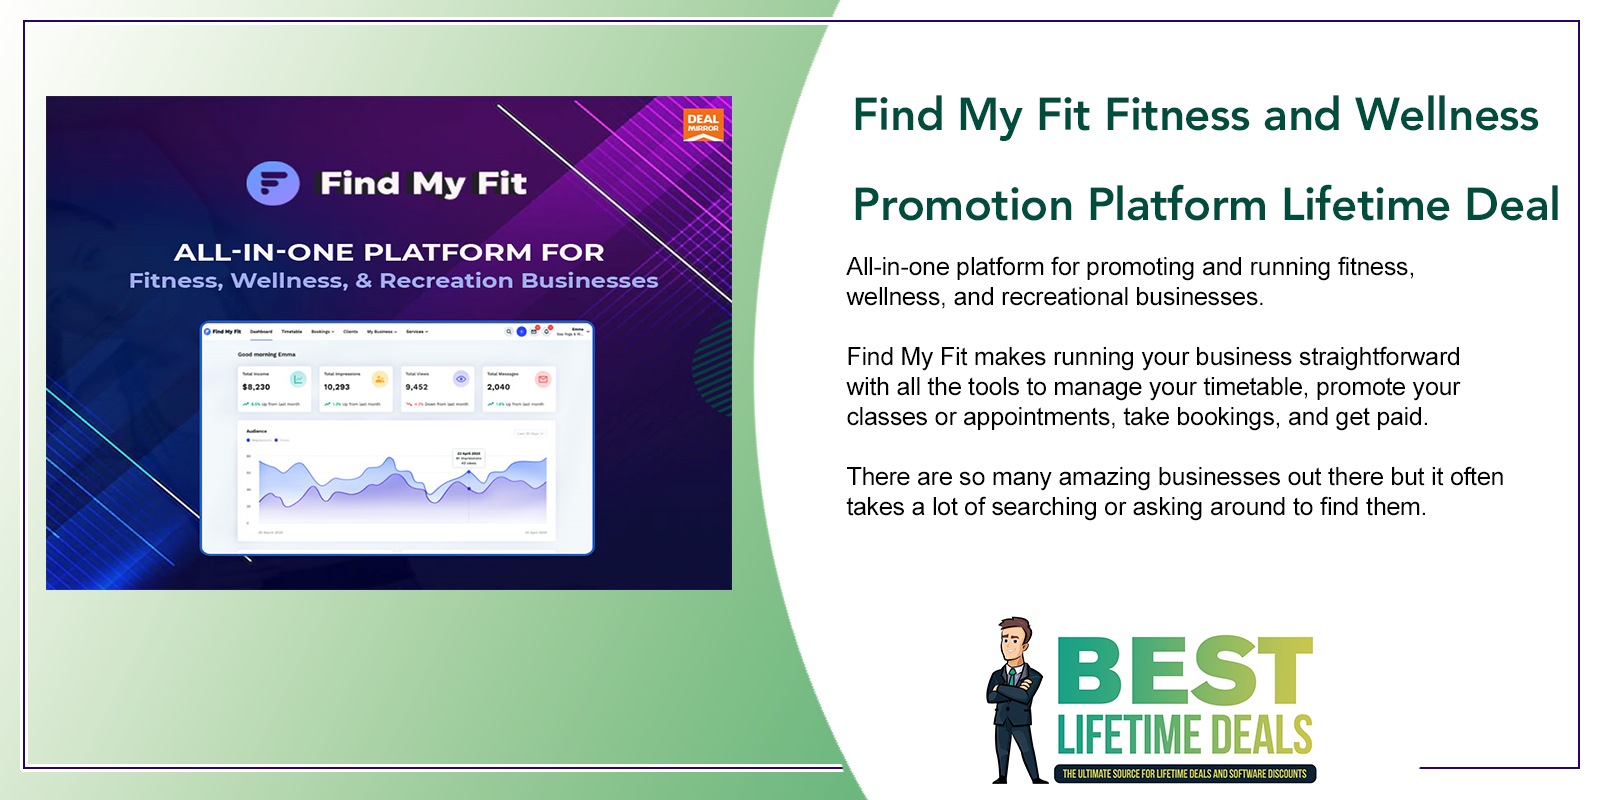 Find My Fit Fitness and Wellness Promotion Platform Lifetime Deal Featured Image